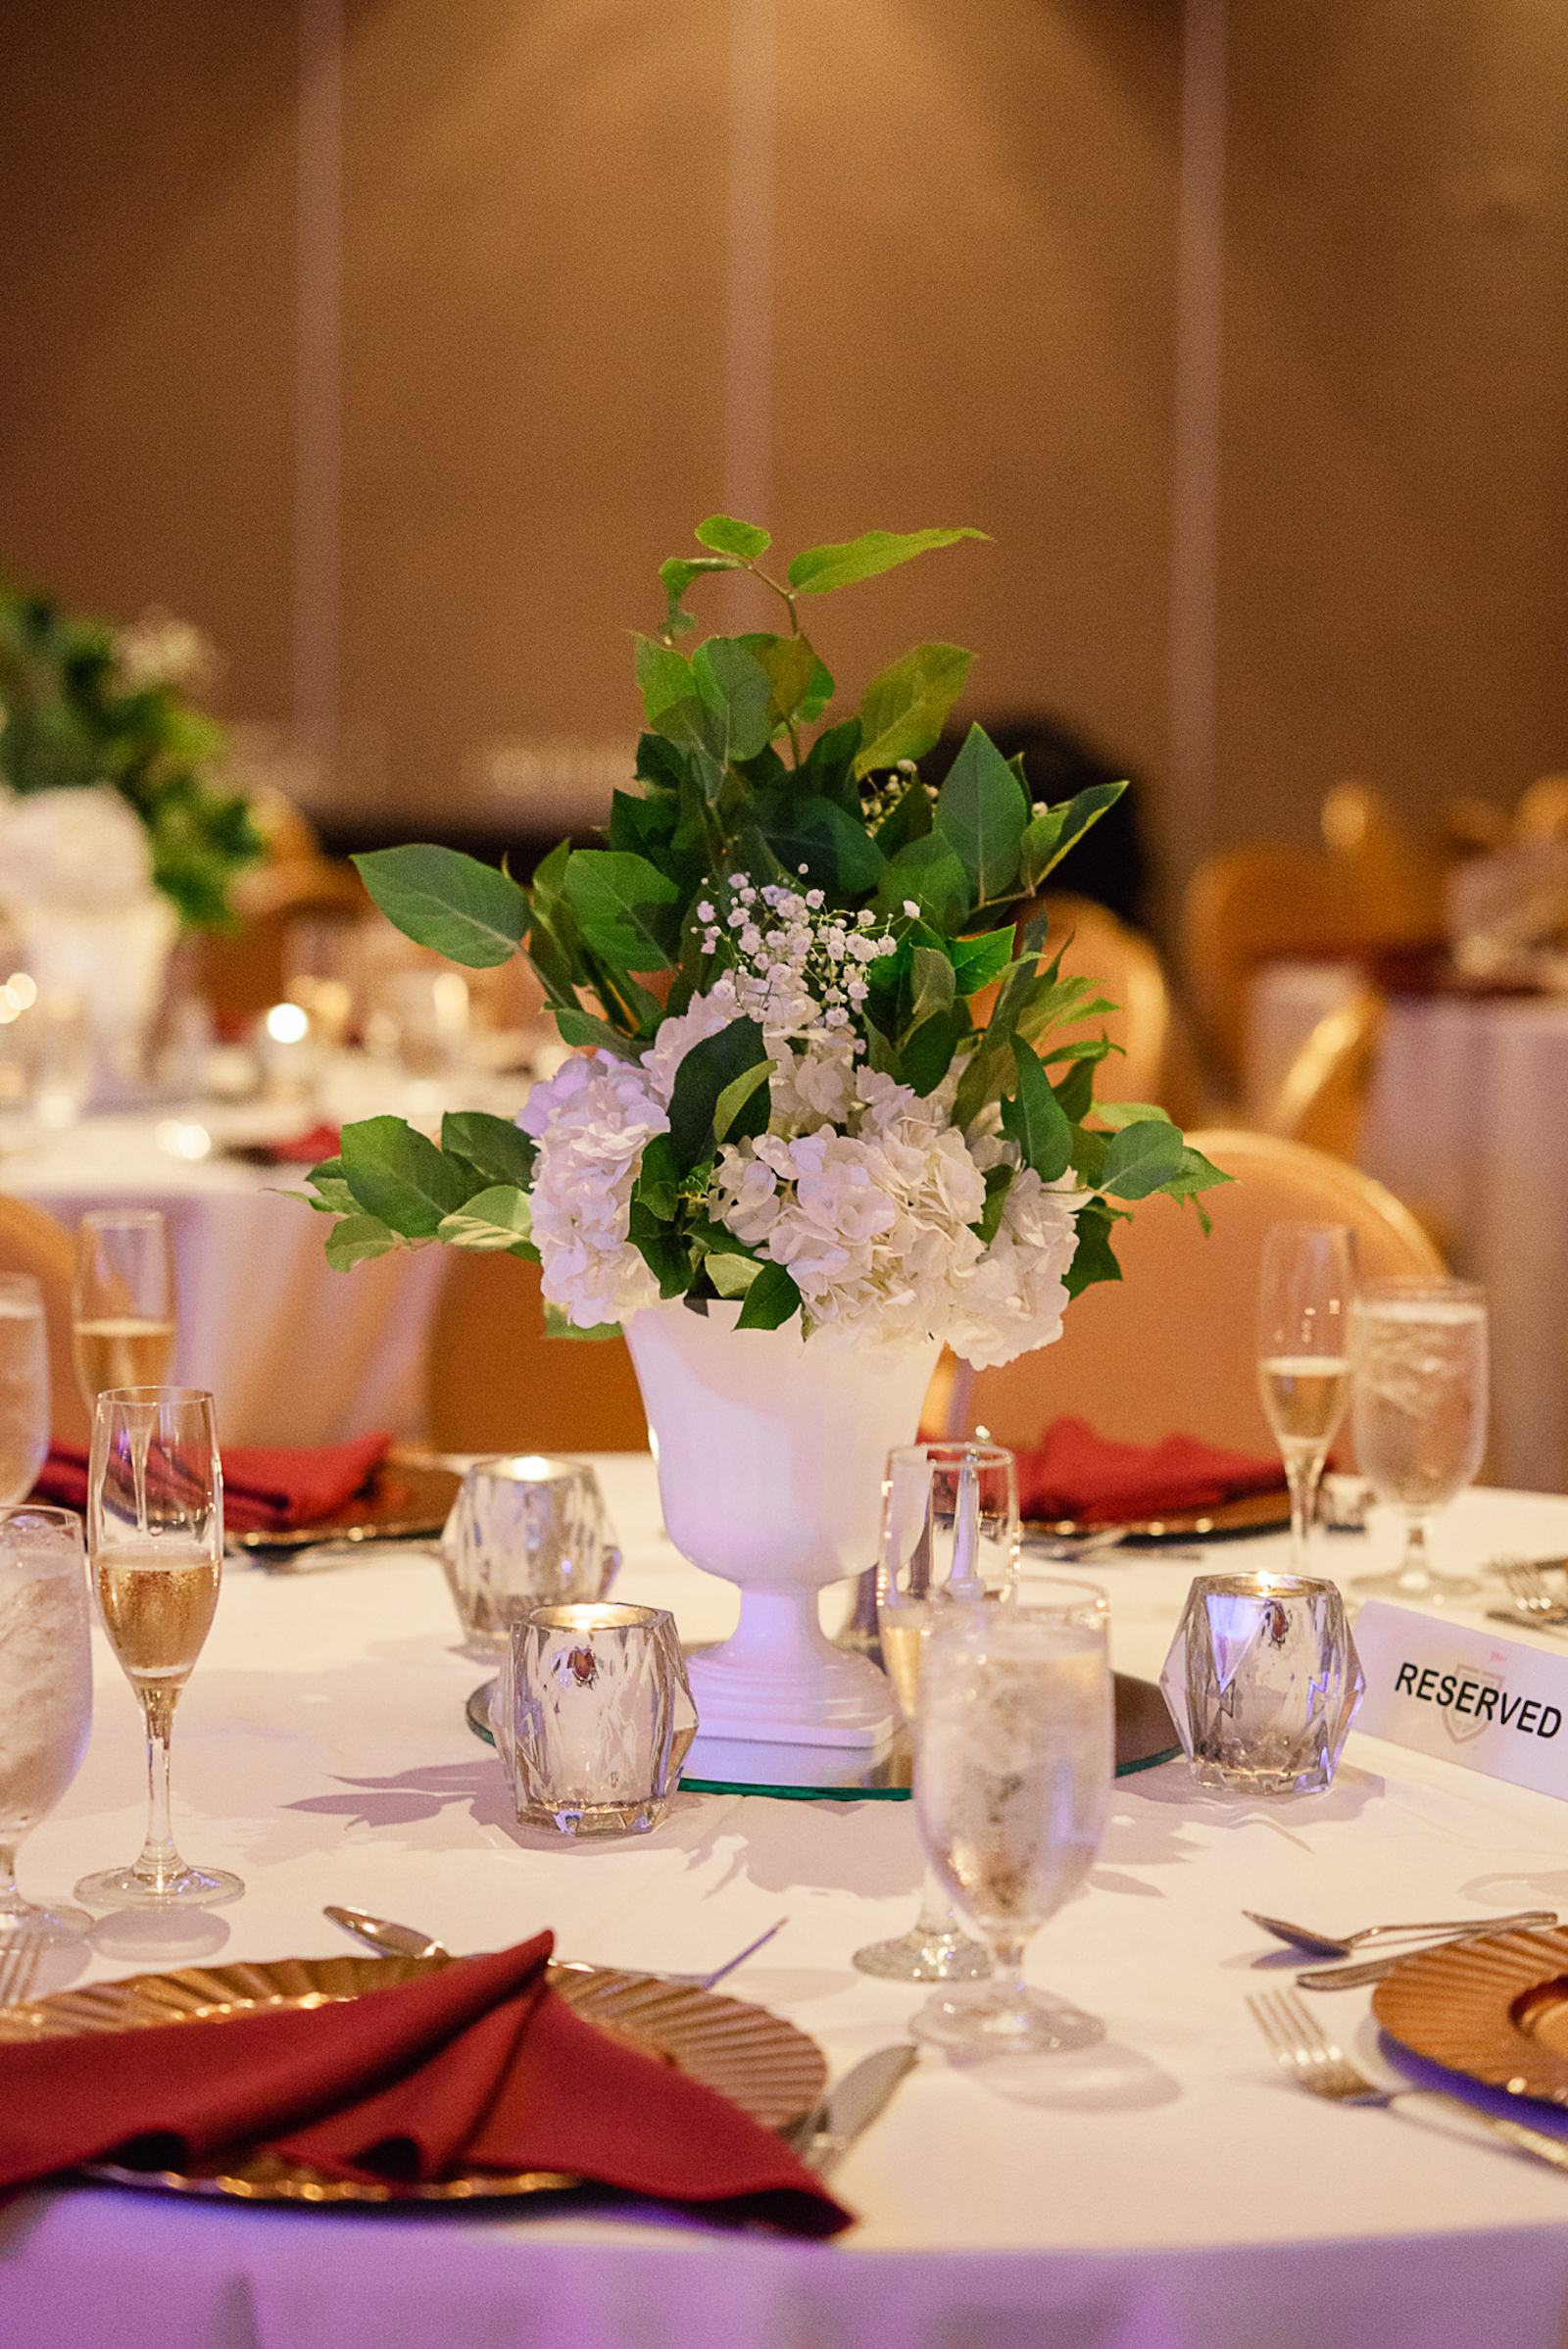 Greenery with White Floral Centerpieces